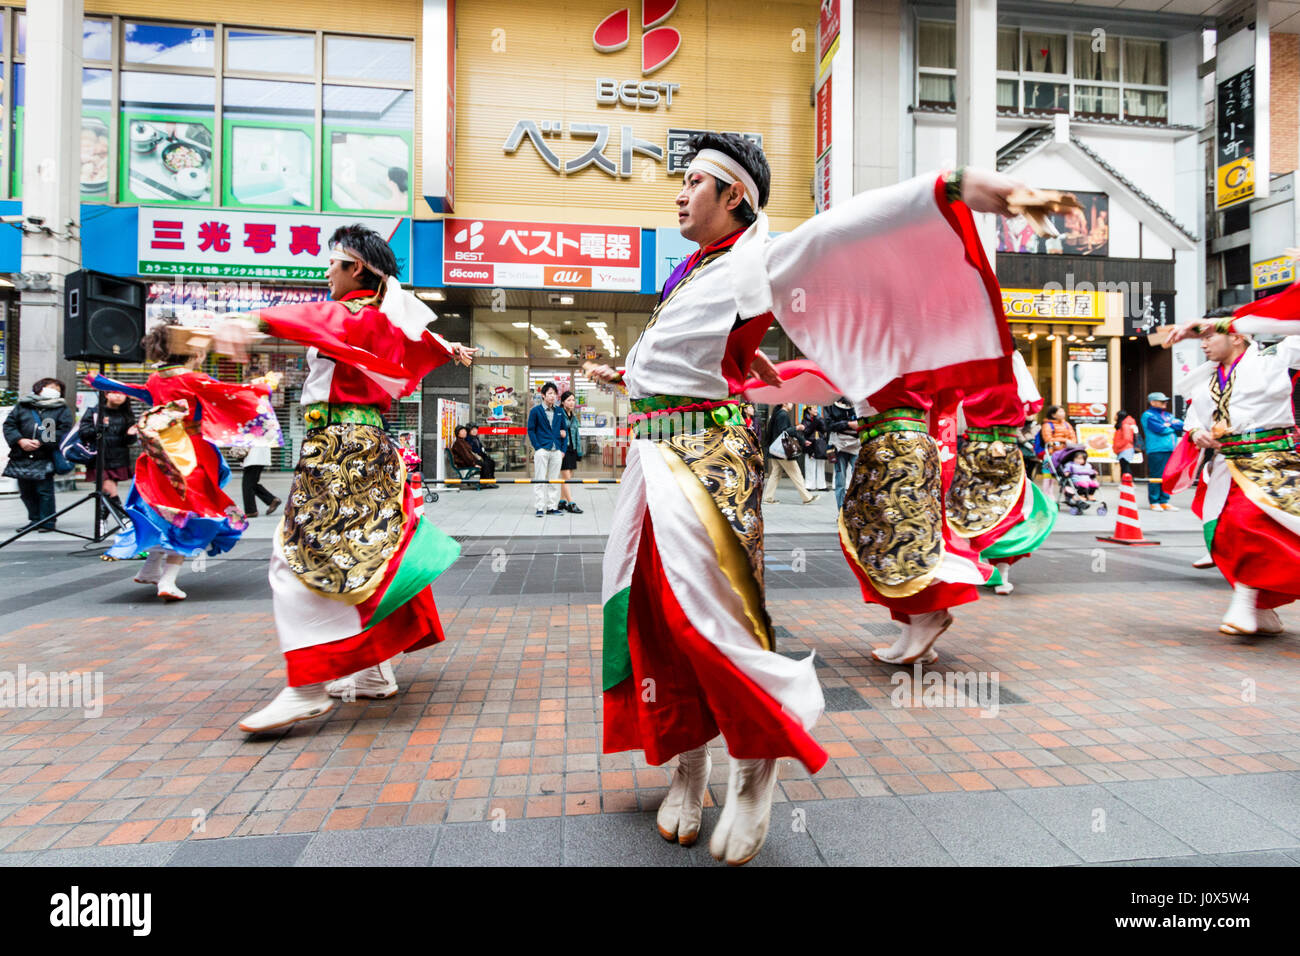 Hinokuni Yosakoi Dance Festival. Male team dressed in red and white yukata with green sash and long swirling sleeves, dancing in shopping mall. Stock Photo